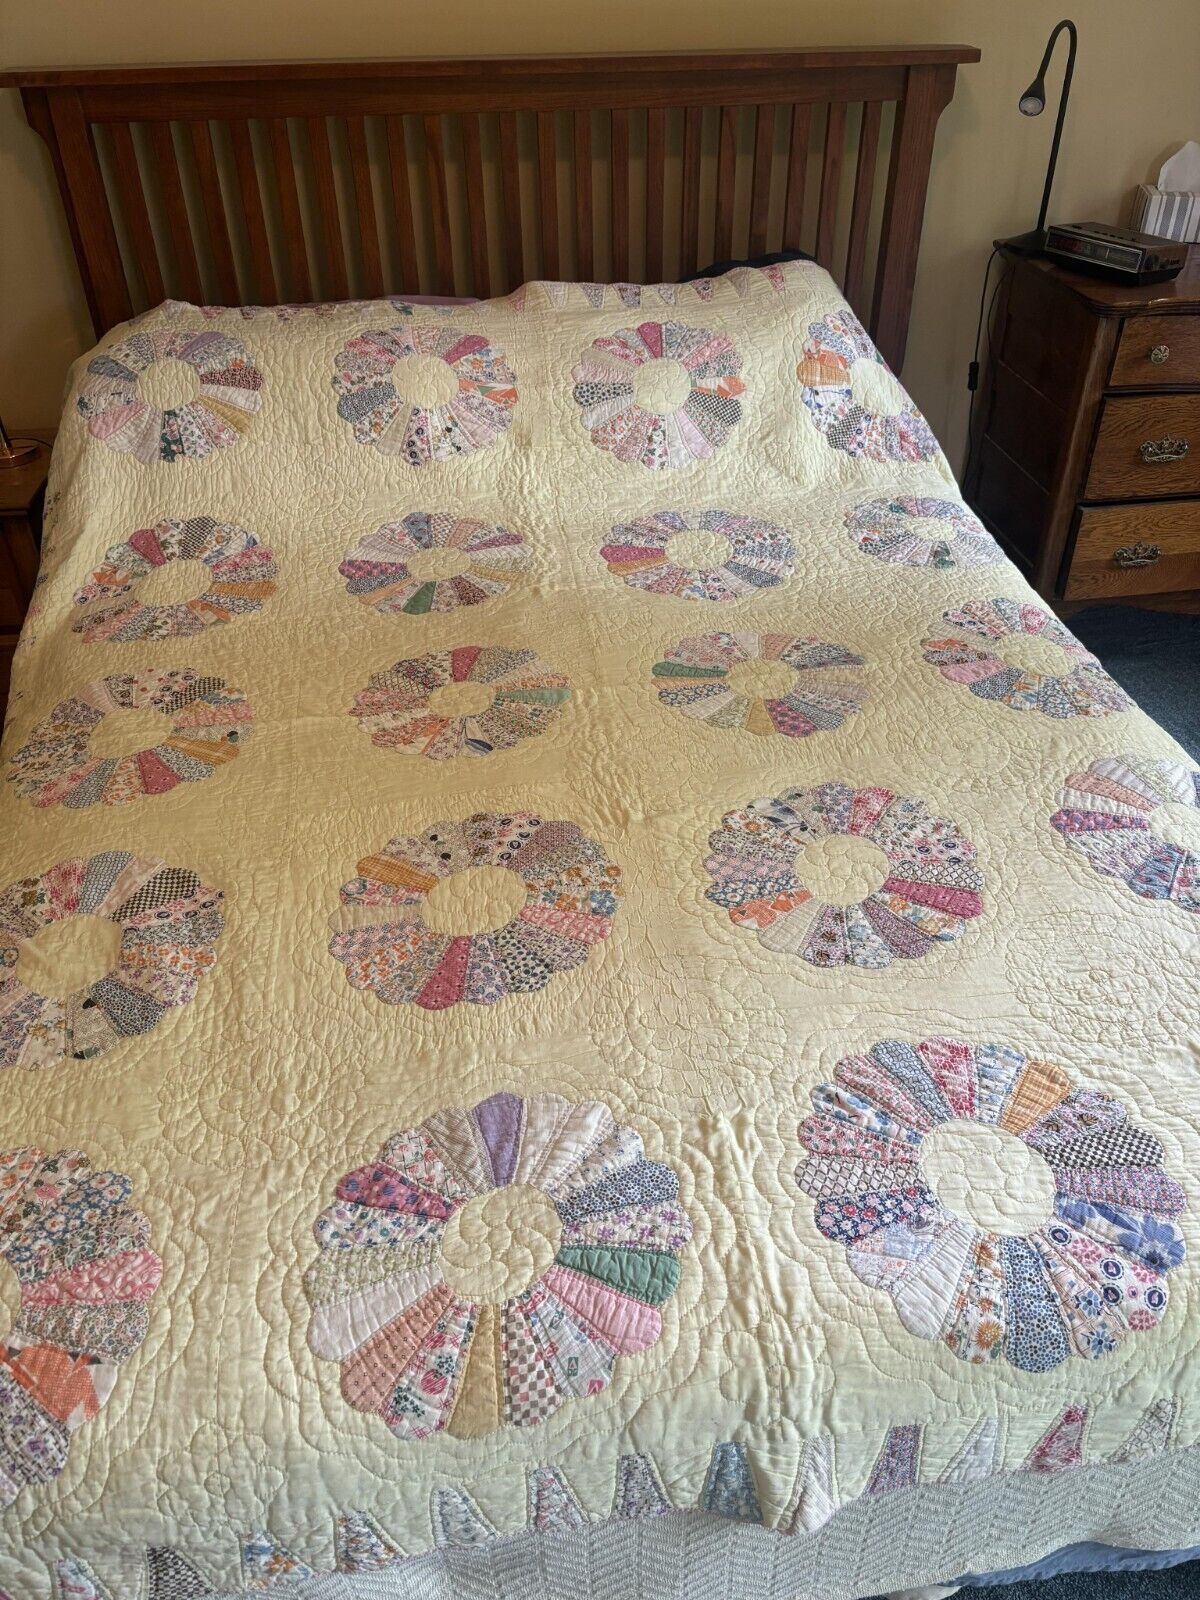 Vintage 30s 40s Dresden Plate Quilt Hand Stitched Handmade 74x89” Early Fabrics